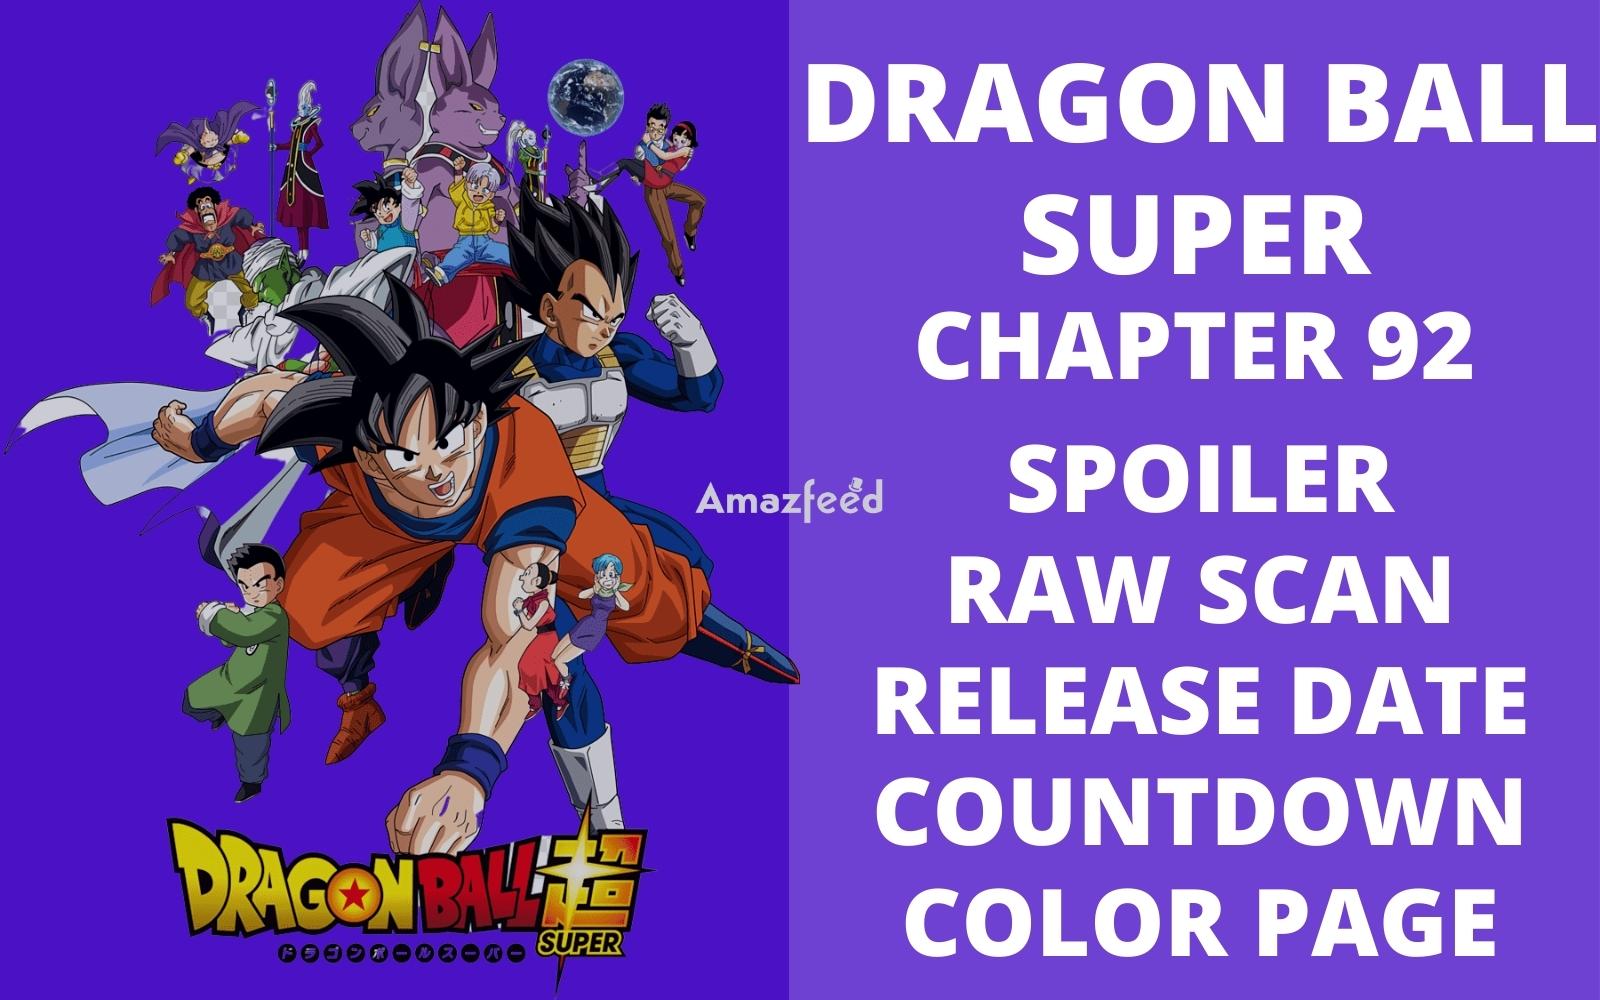 Dragon Ball Super Chapter 92 Spoiler, Raw Scan, Color Page, Release Date